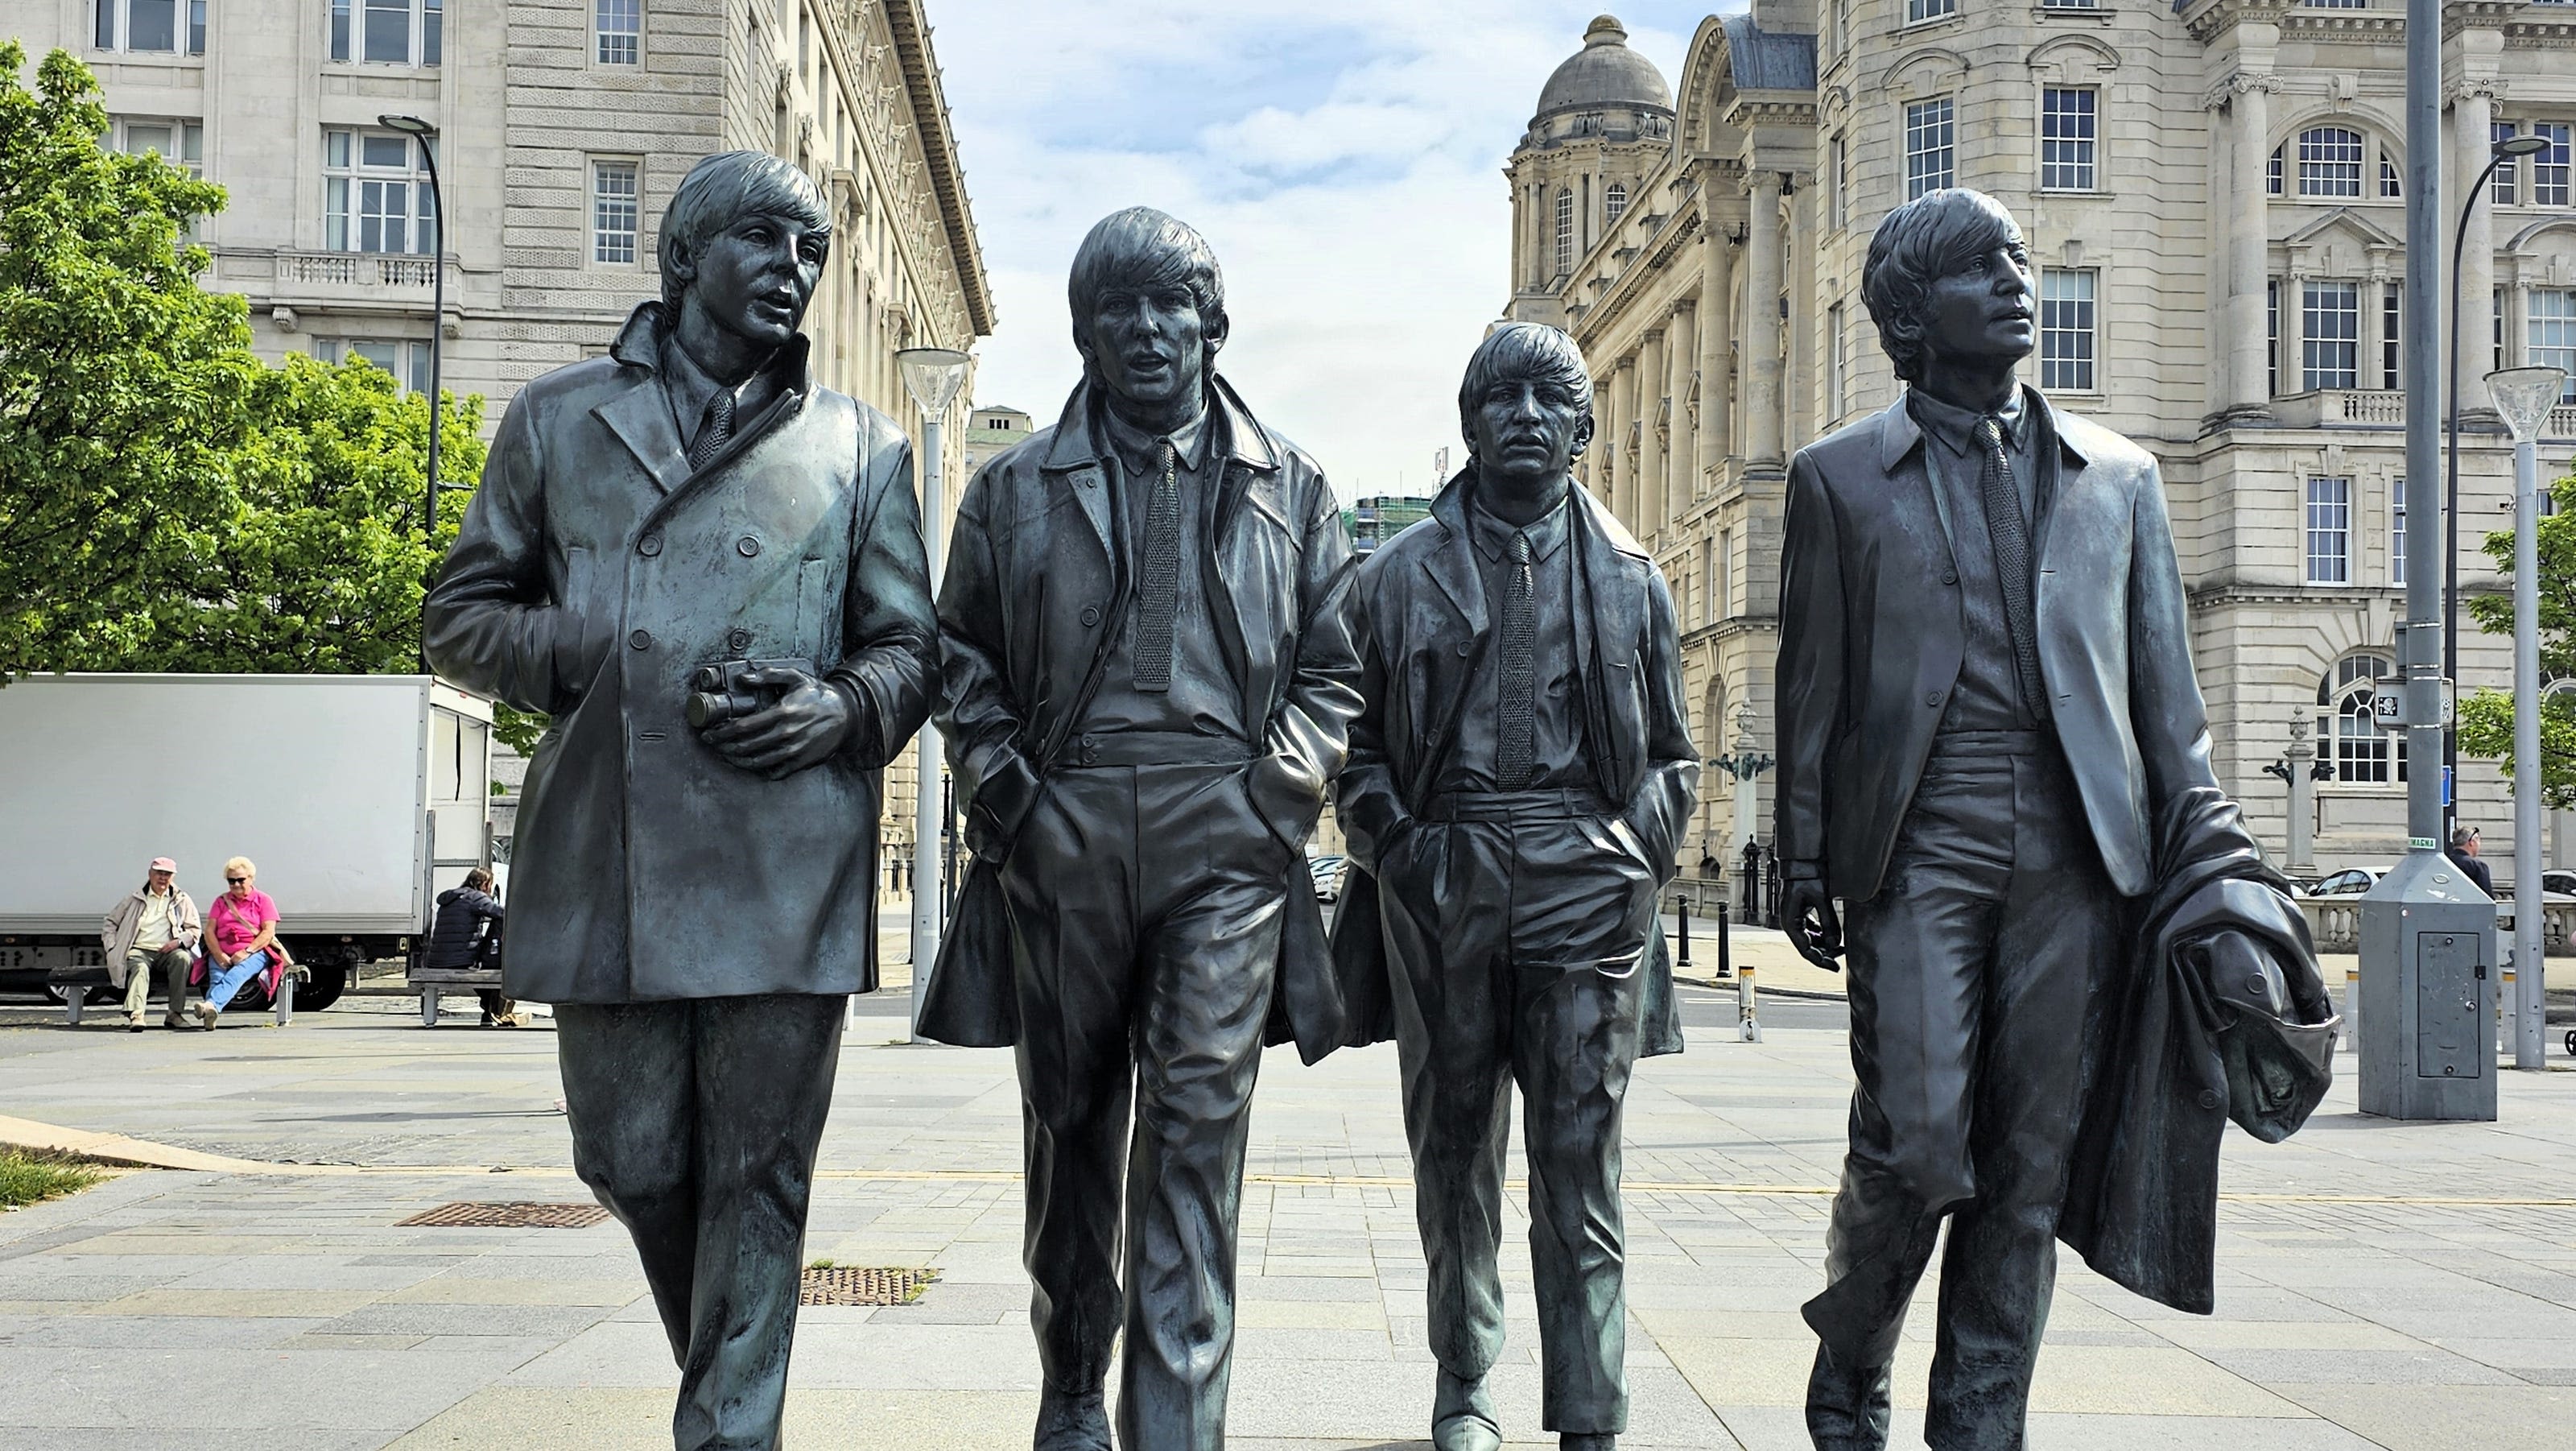 Retracing the Beatles' steps in Liverpool is the highlight of this British Isles cruise